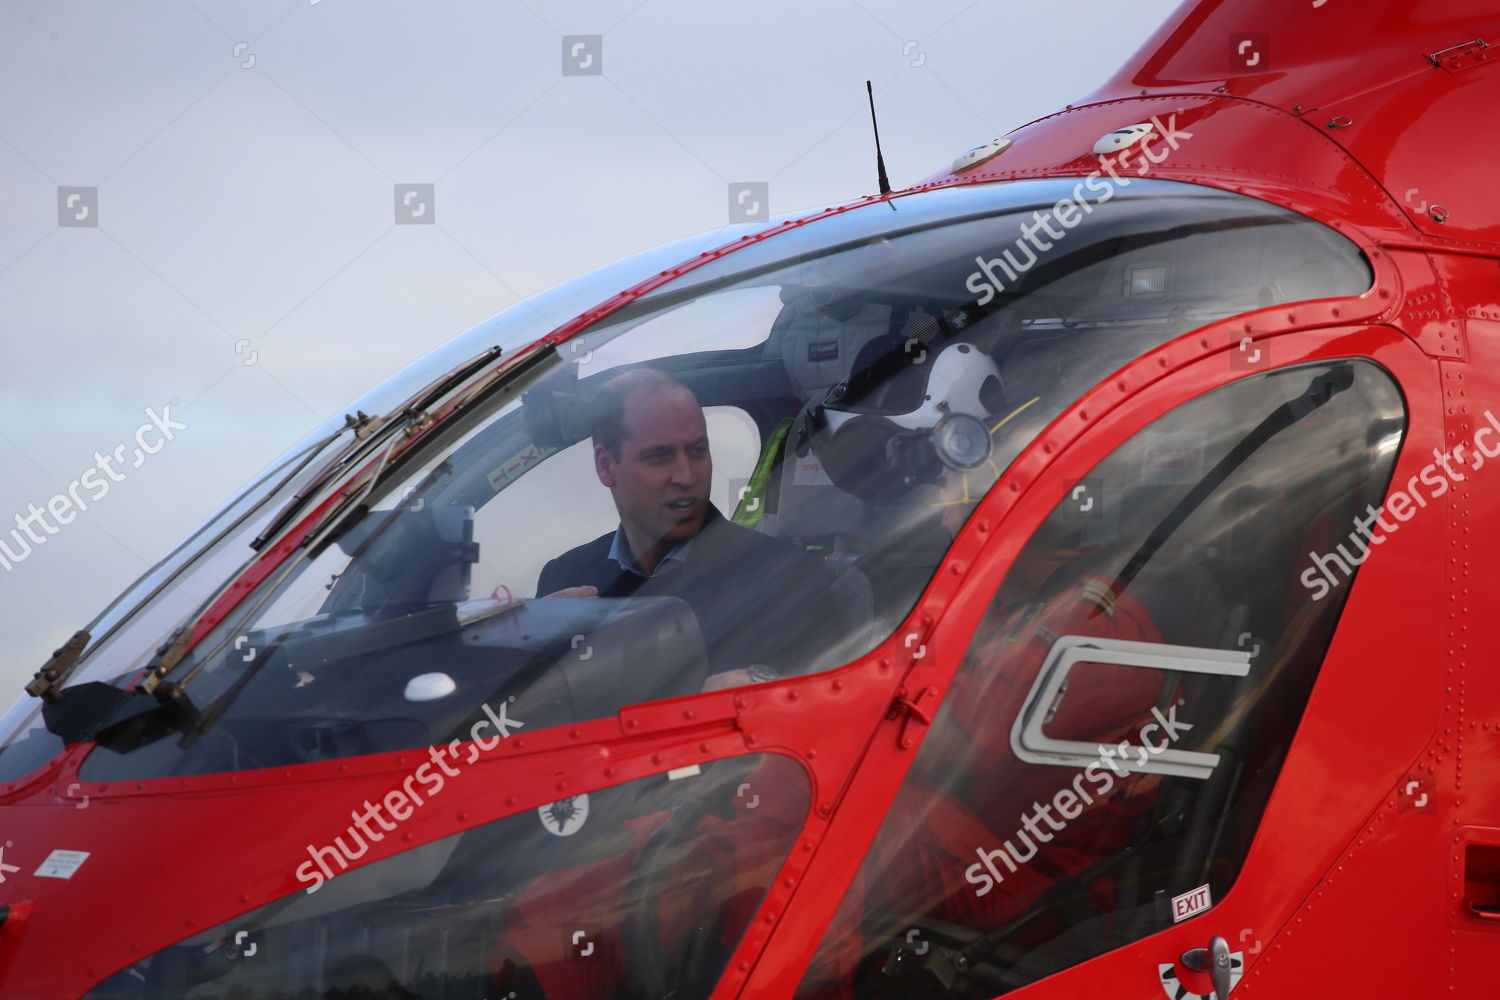 prince-william-arrives-at-the-royal-london-hospital-aboard-an-air-ambulance-uk-shutterstock-editorial-10052351g.jpg